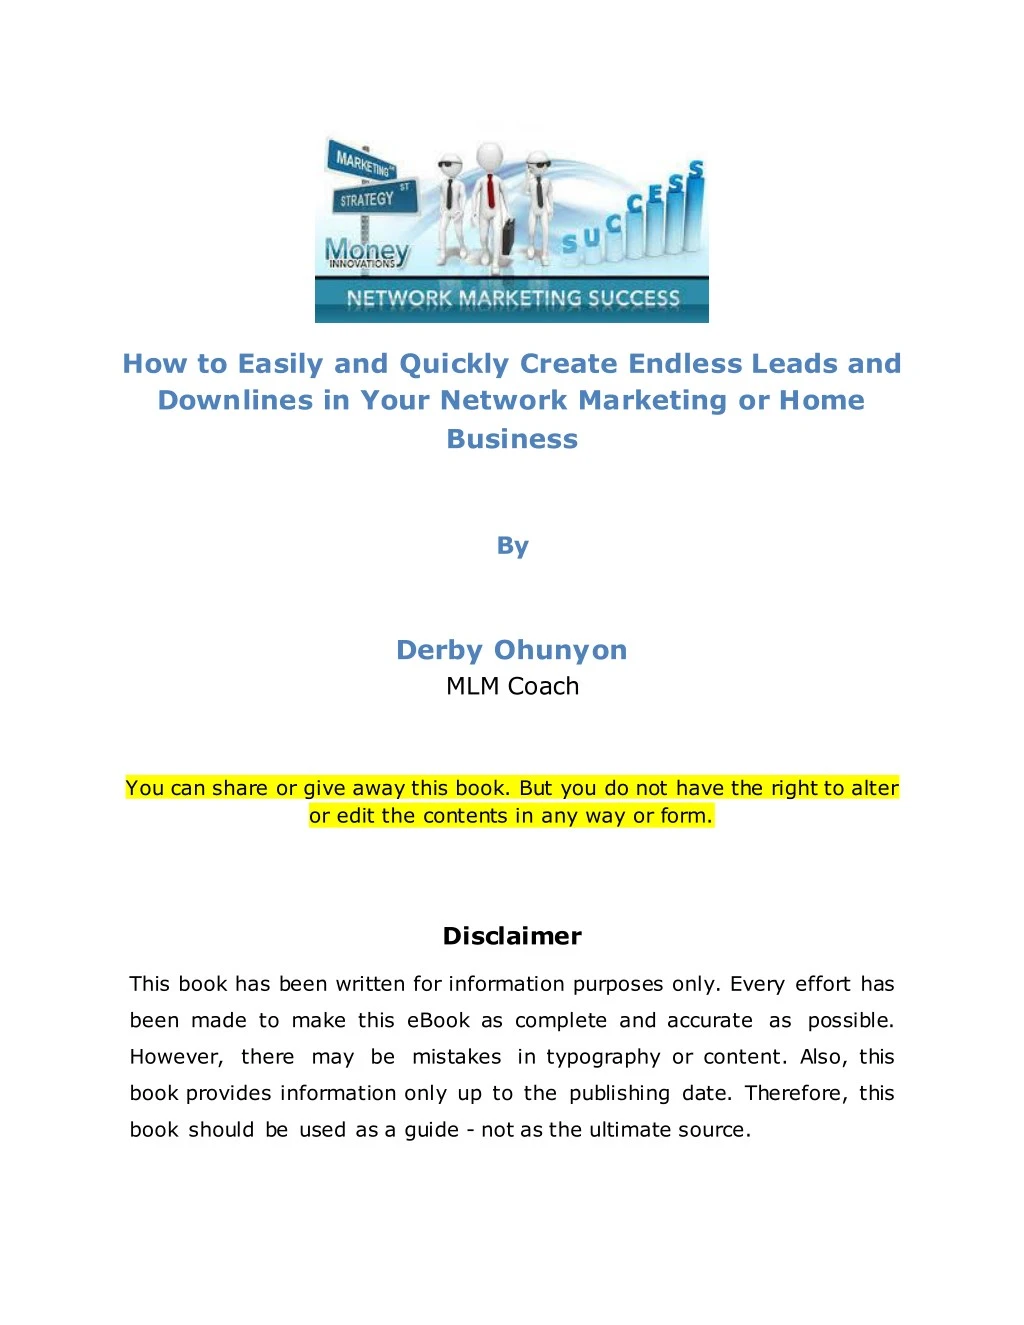 how to easily and quickly create endless leads